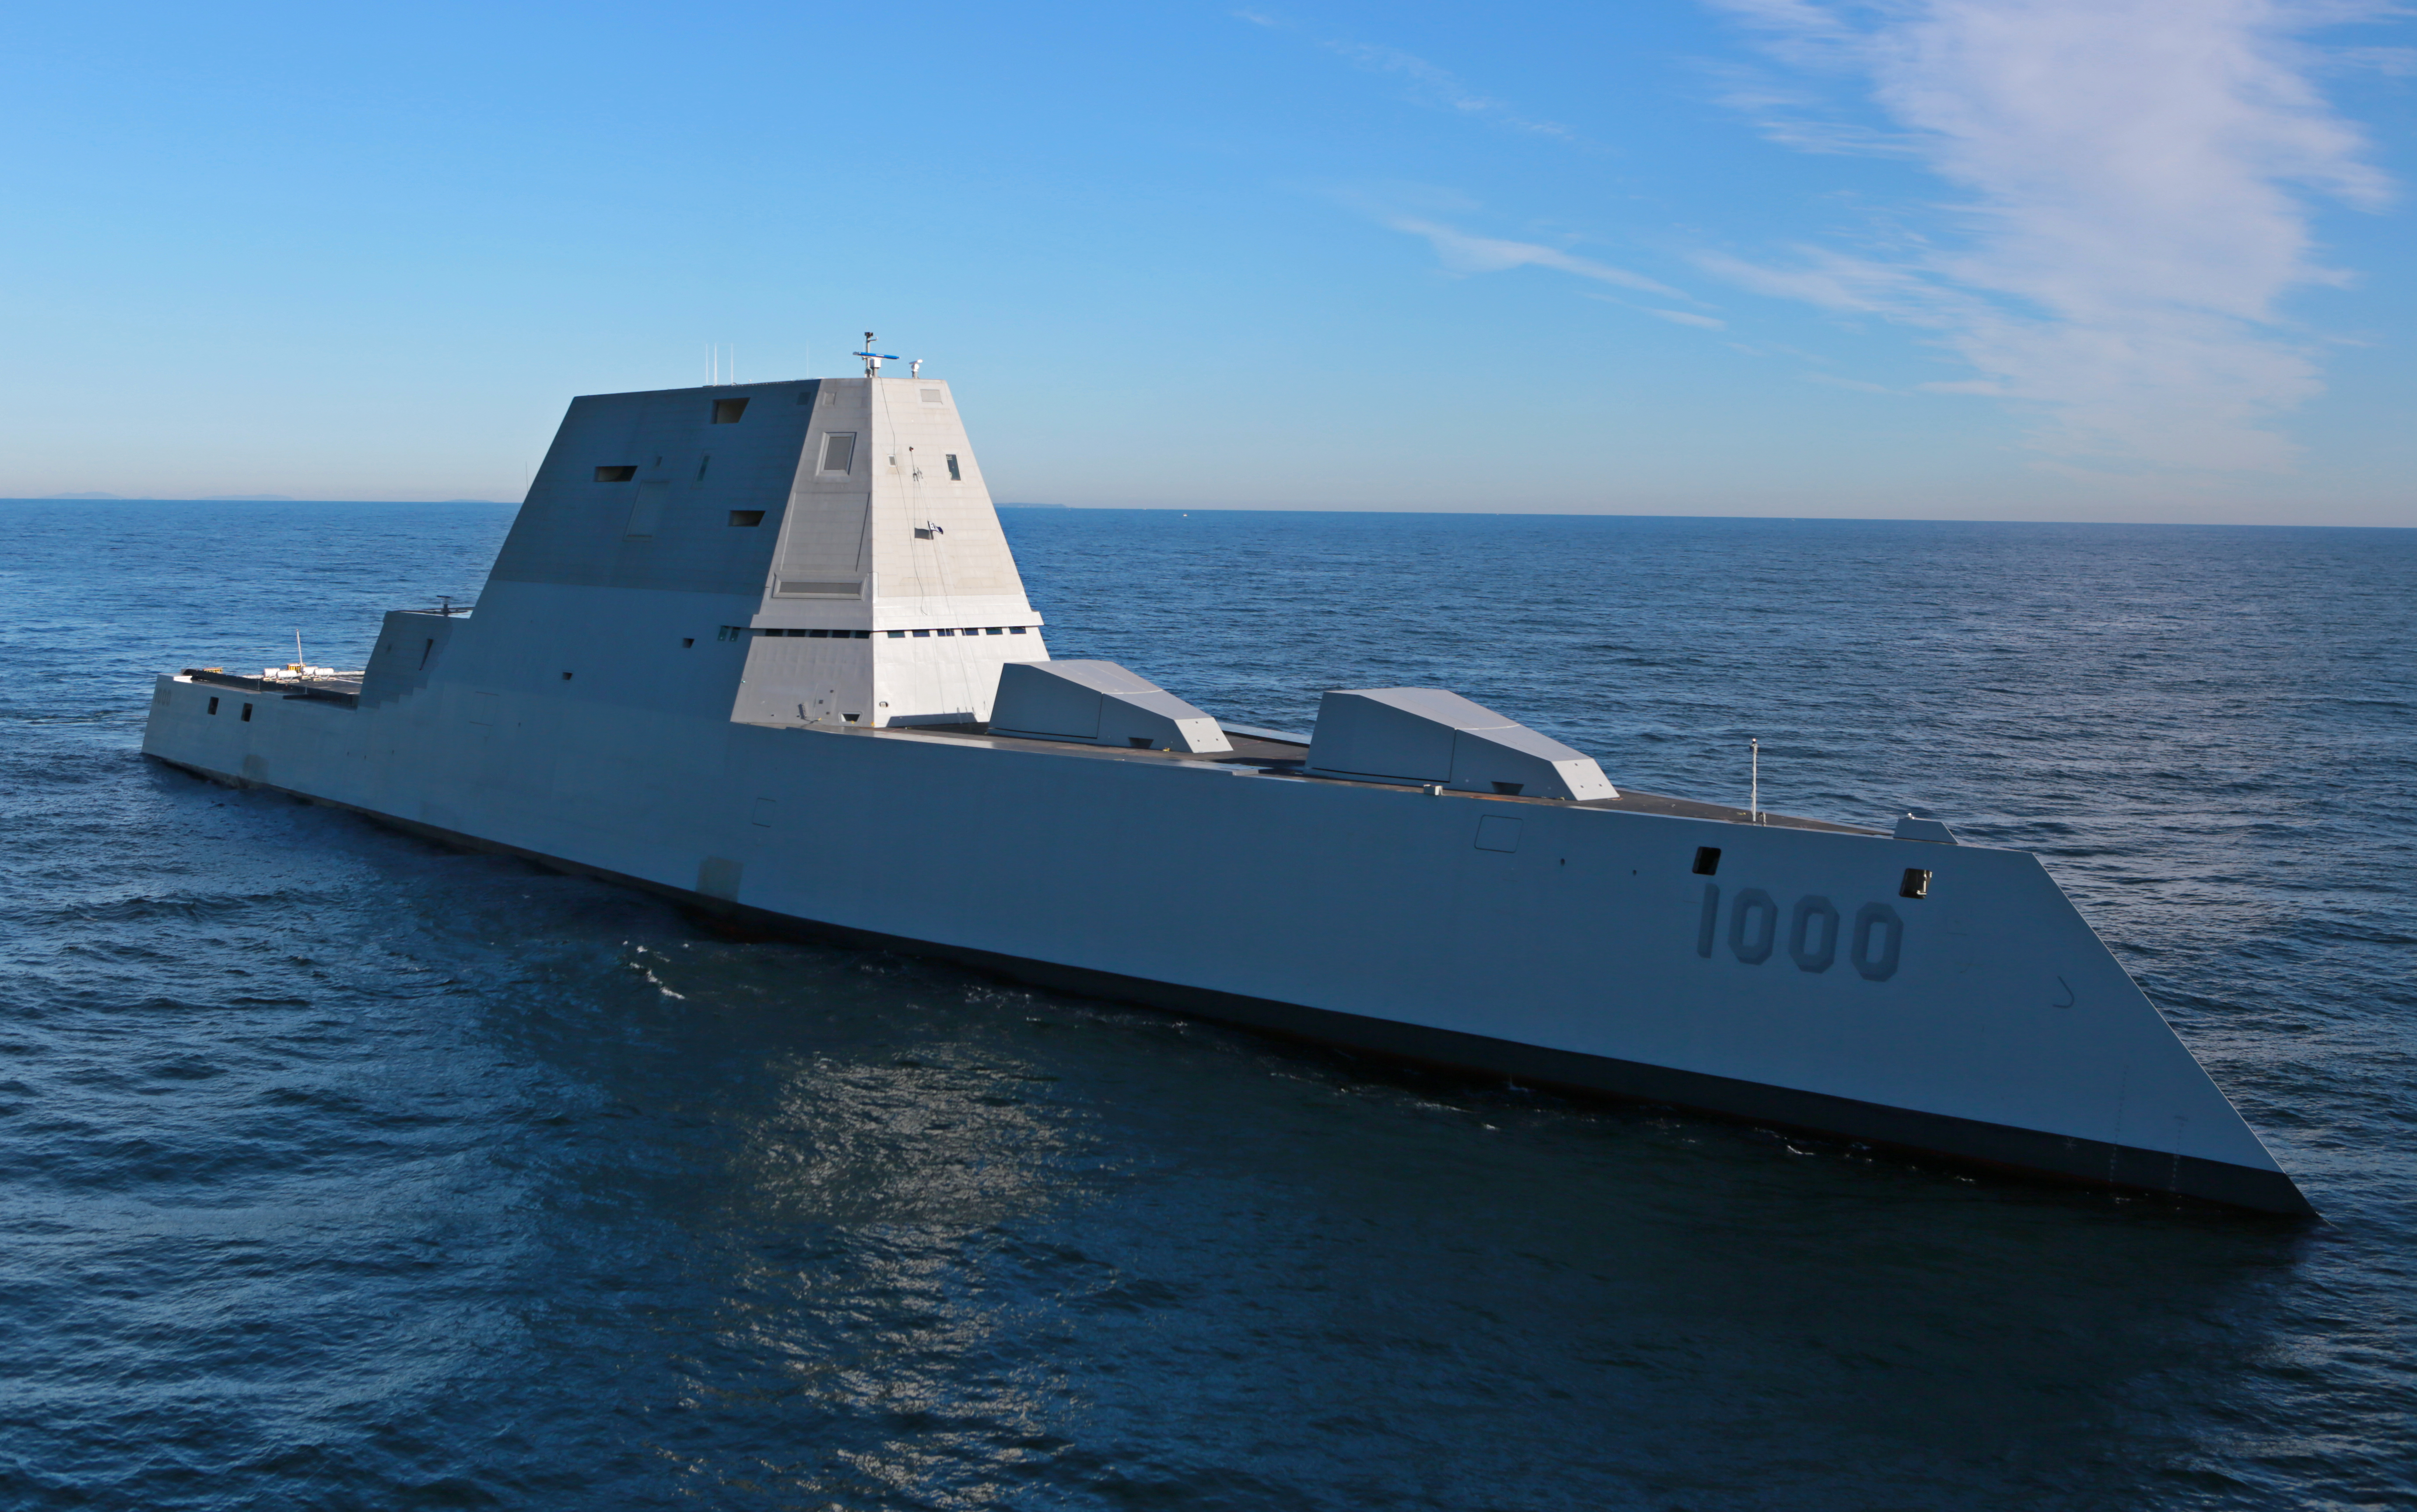 Zumwalt (DDG-1000) is underway for the first time conducting at-sea tests and trials in the Atlantic Ocean on Dec. 7, 2015. US Navy Photo